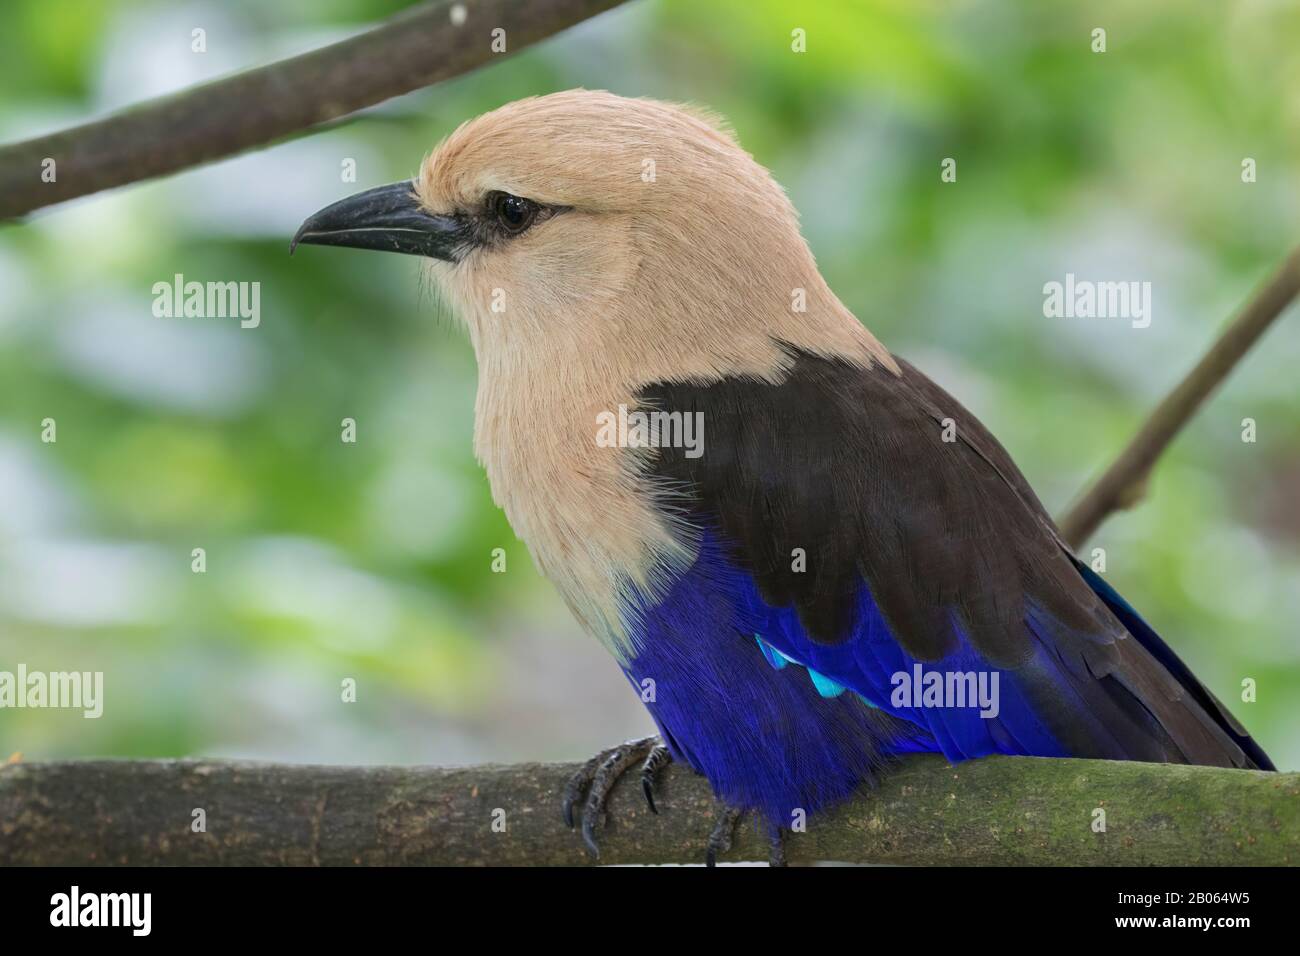 Blue-bellied roller (Coracias cyanogaster) close up Stock Photo